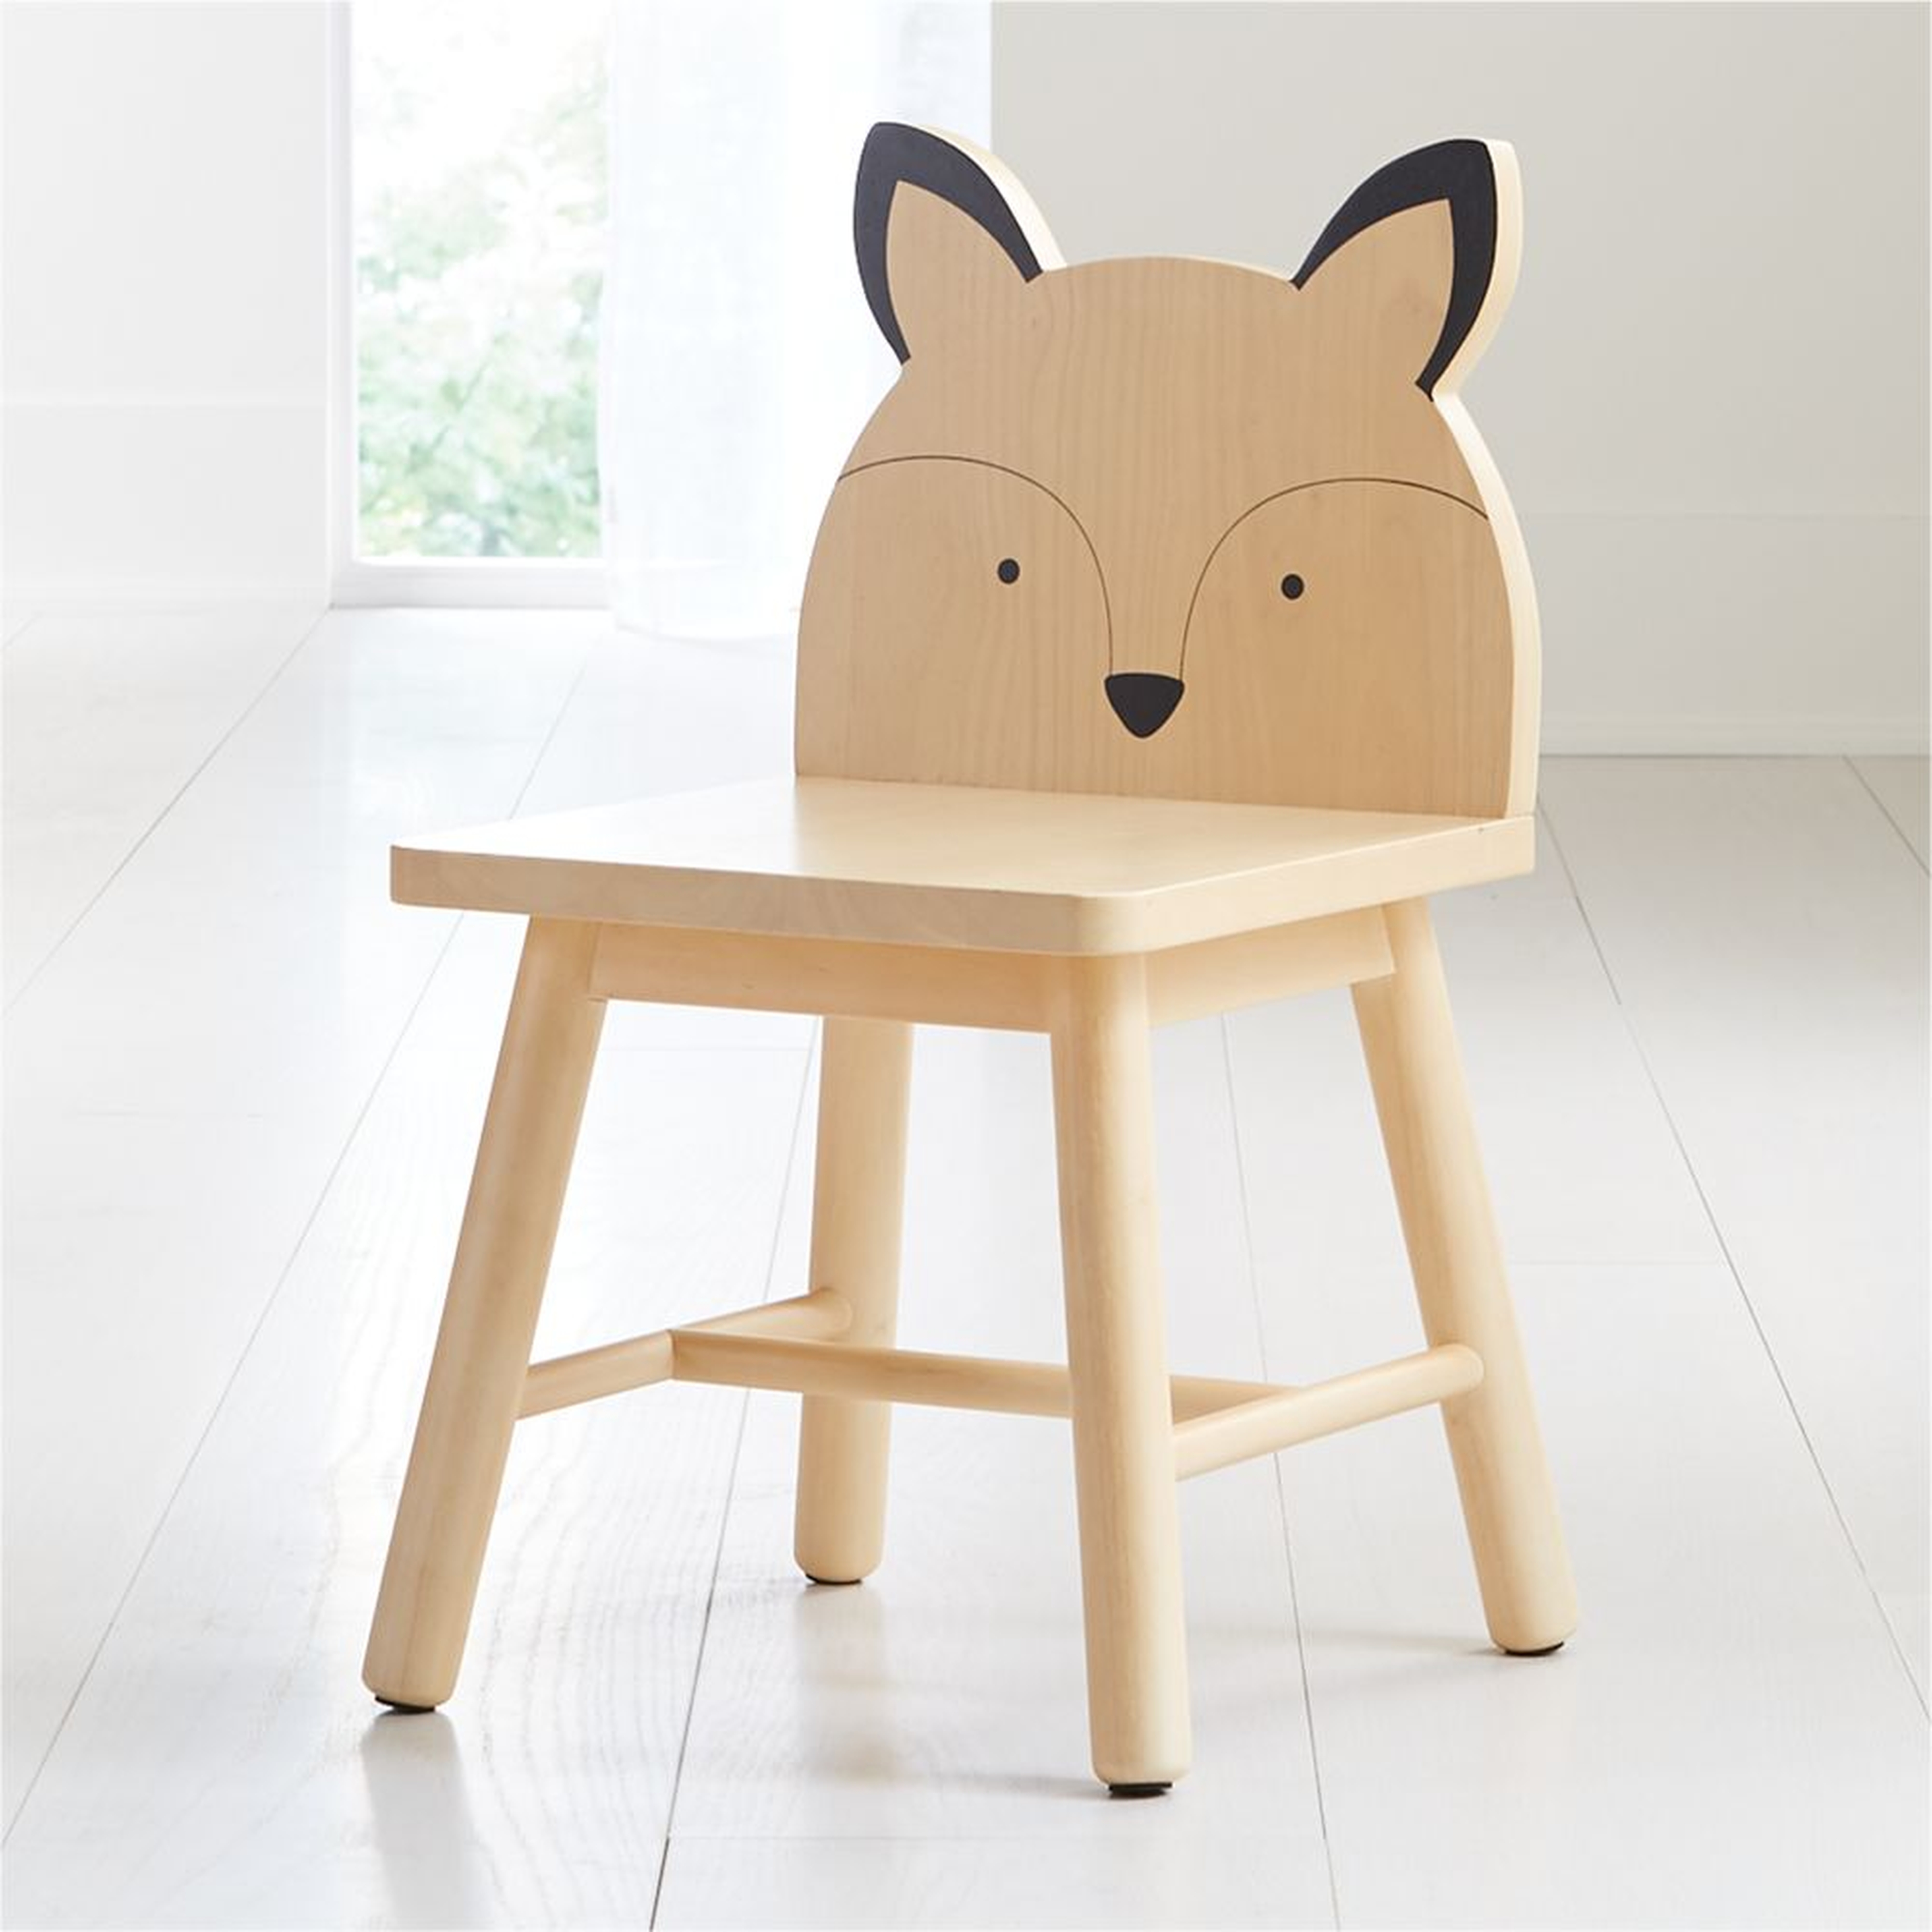 Fox Animal Wood Kids Play Chair - Crate and Barrel